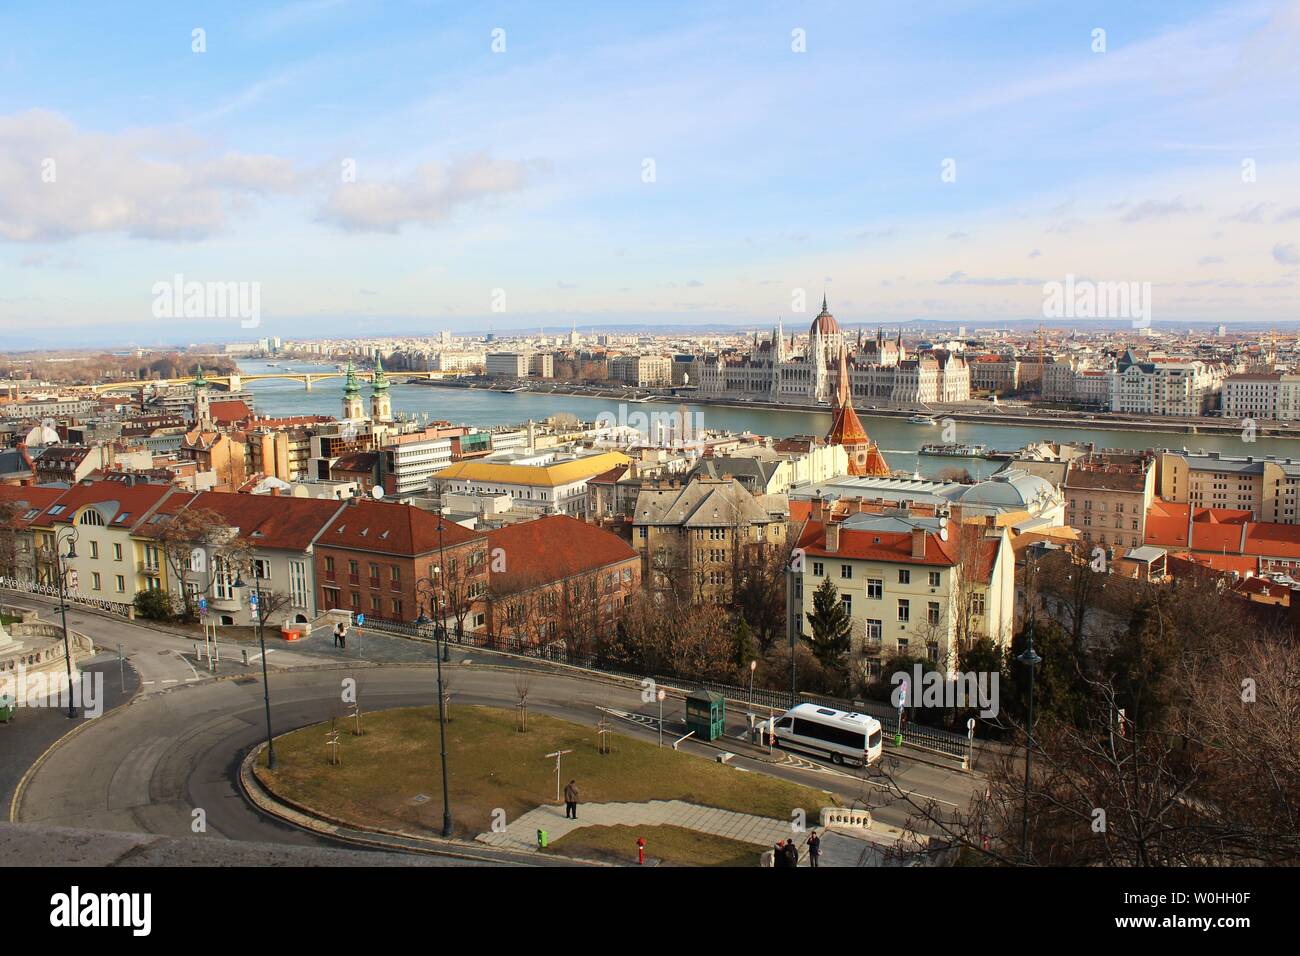 View from Fisherman's Bastion, of the Hungarian capital city of Budapest, including the iconic Danube River, House of Parliament and Margaret Bridge. Stock Photo